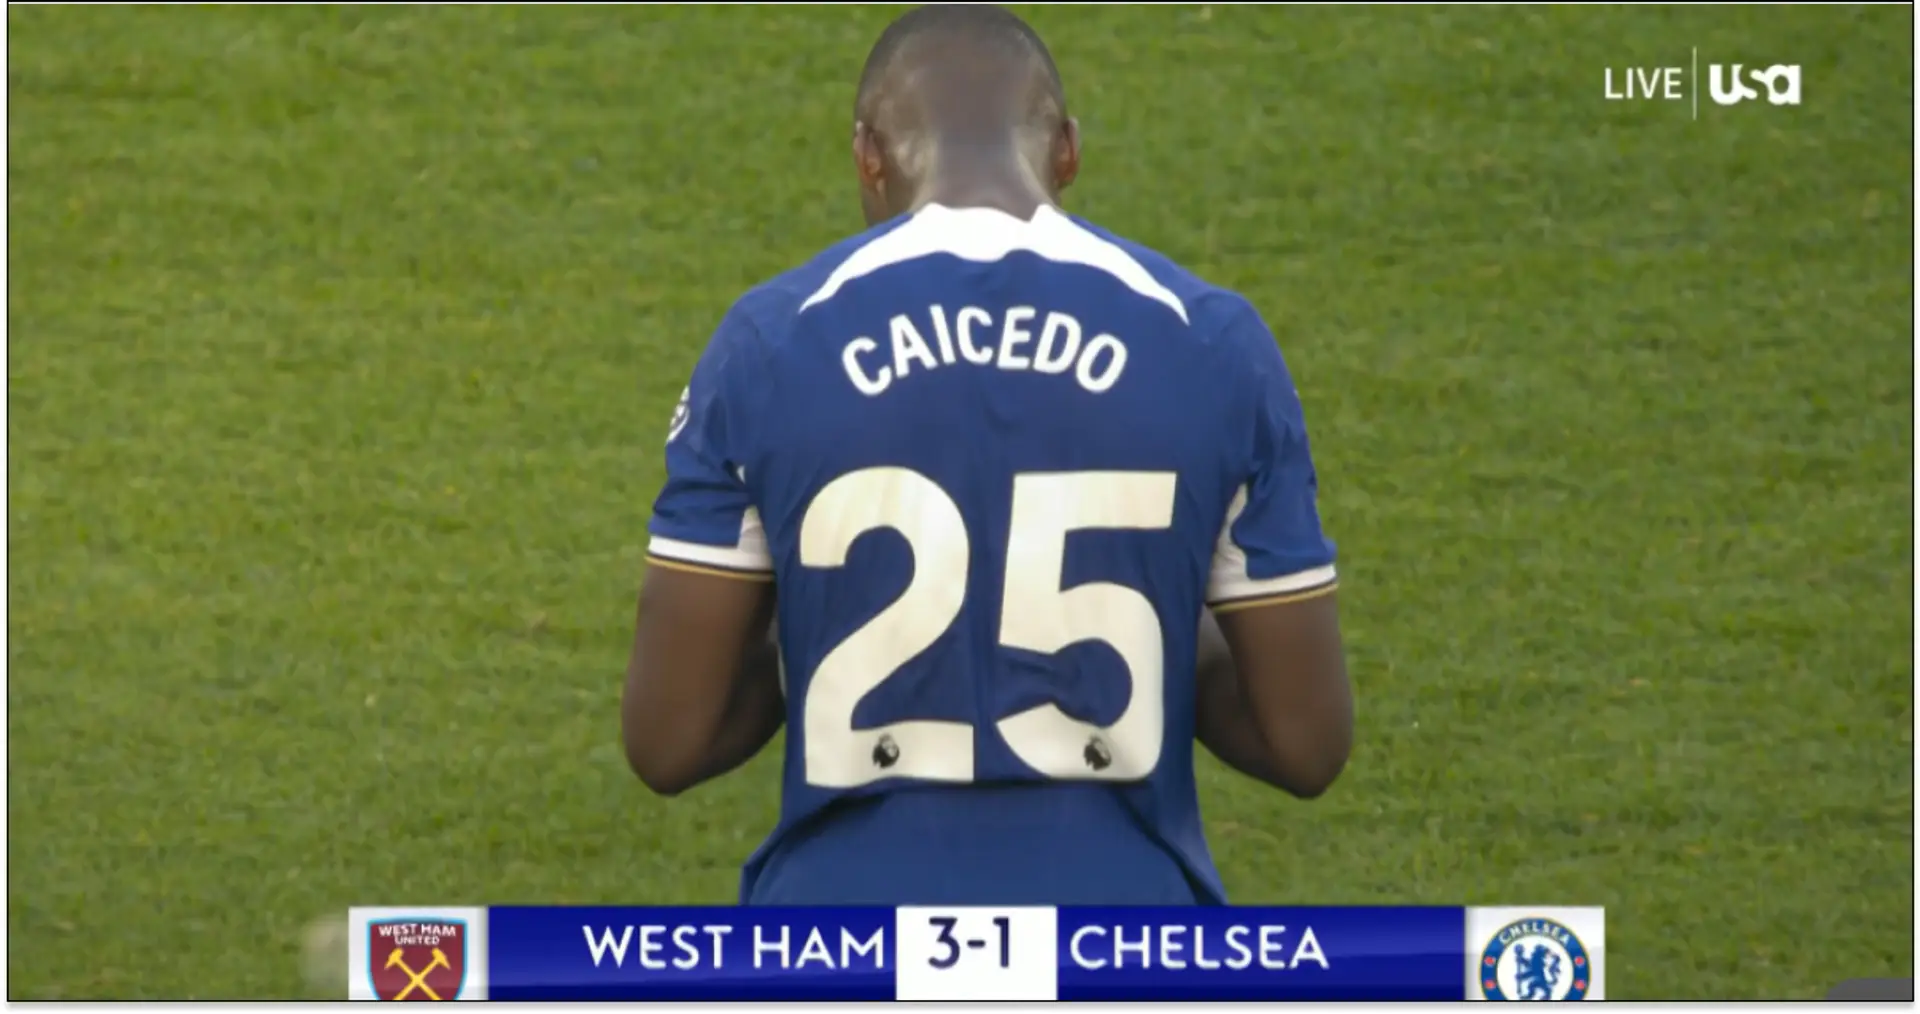 Caicedo gives away penalty on debut as 10-man West Ham beat Chelsea